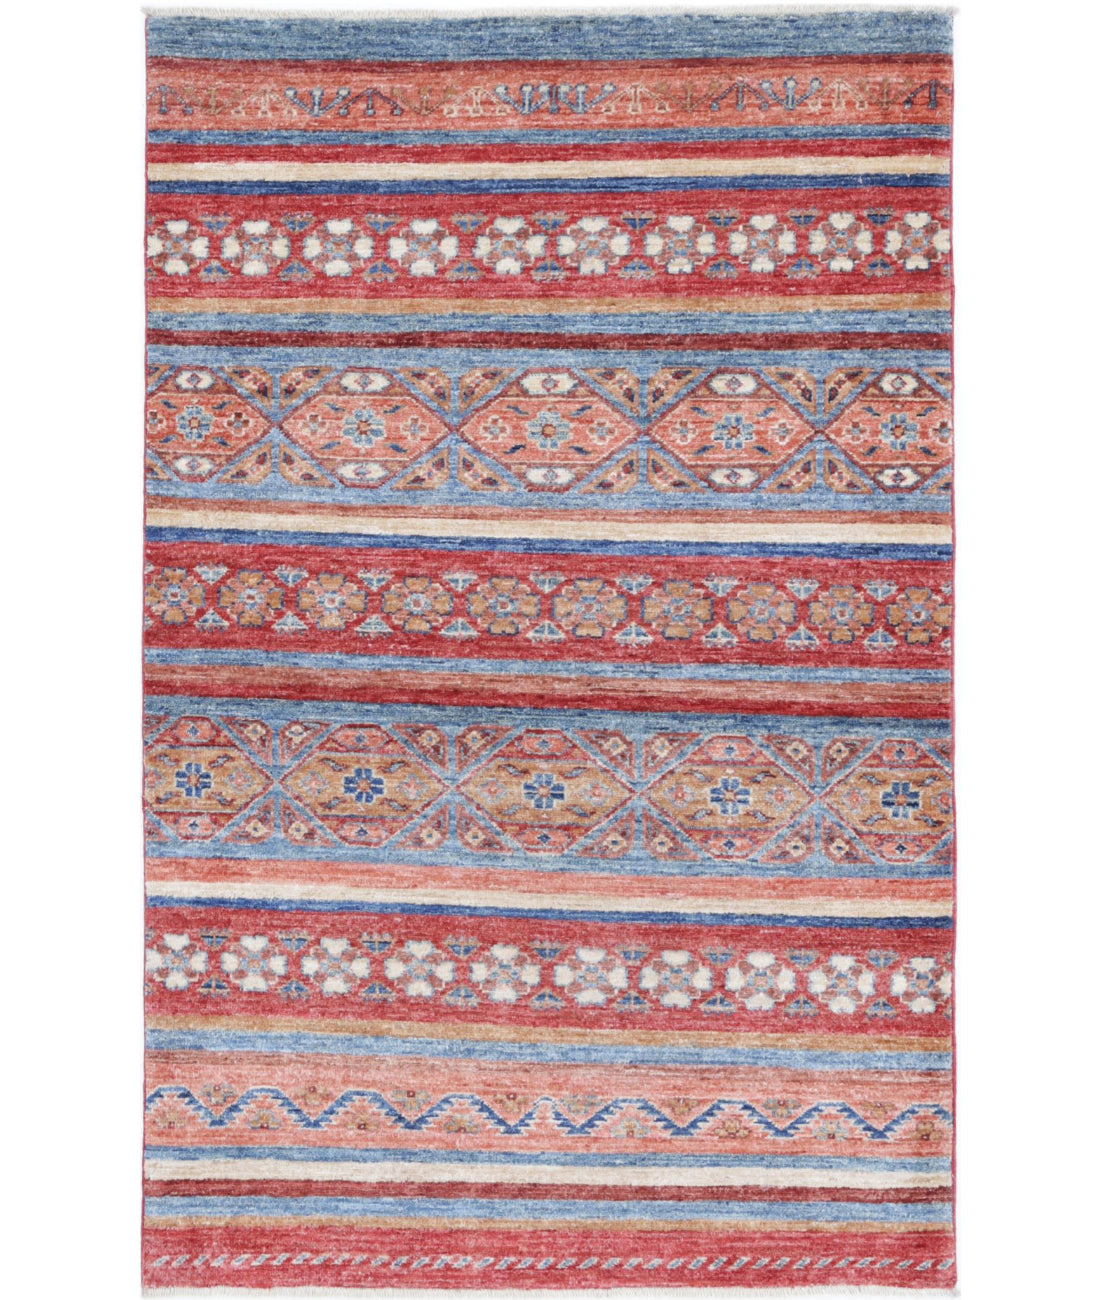 Hand Knotted Khurjeen Wool Rug - 2'11'' x 4'11'' 2'11'' x 4'11'' (88 X 148) / Multi / Multi